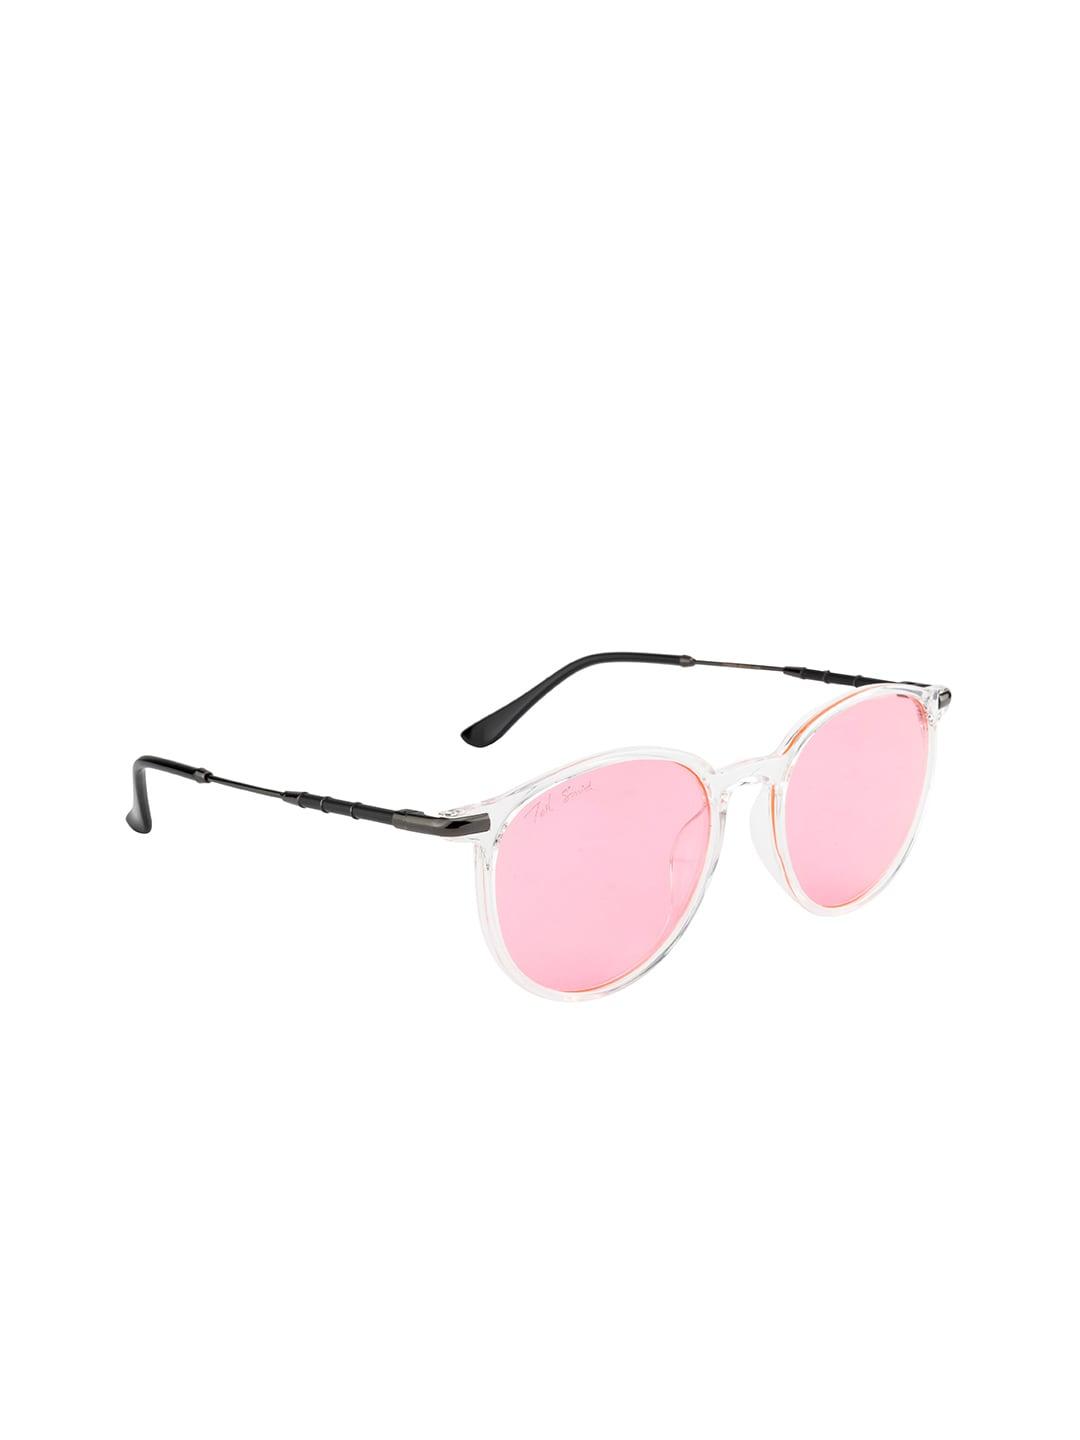 ted smith unisex pink lens & black round sunglasses with uv protected lens